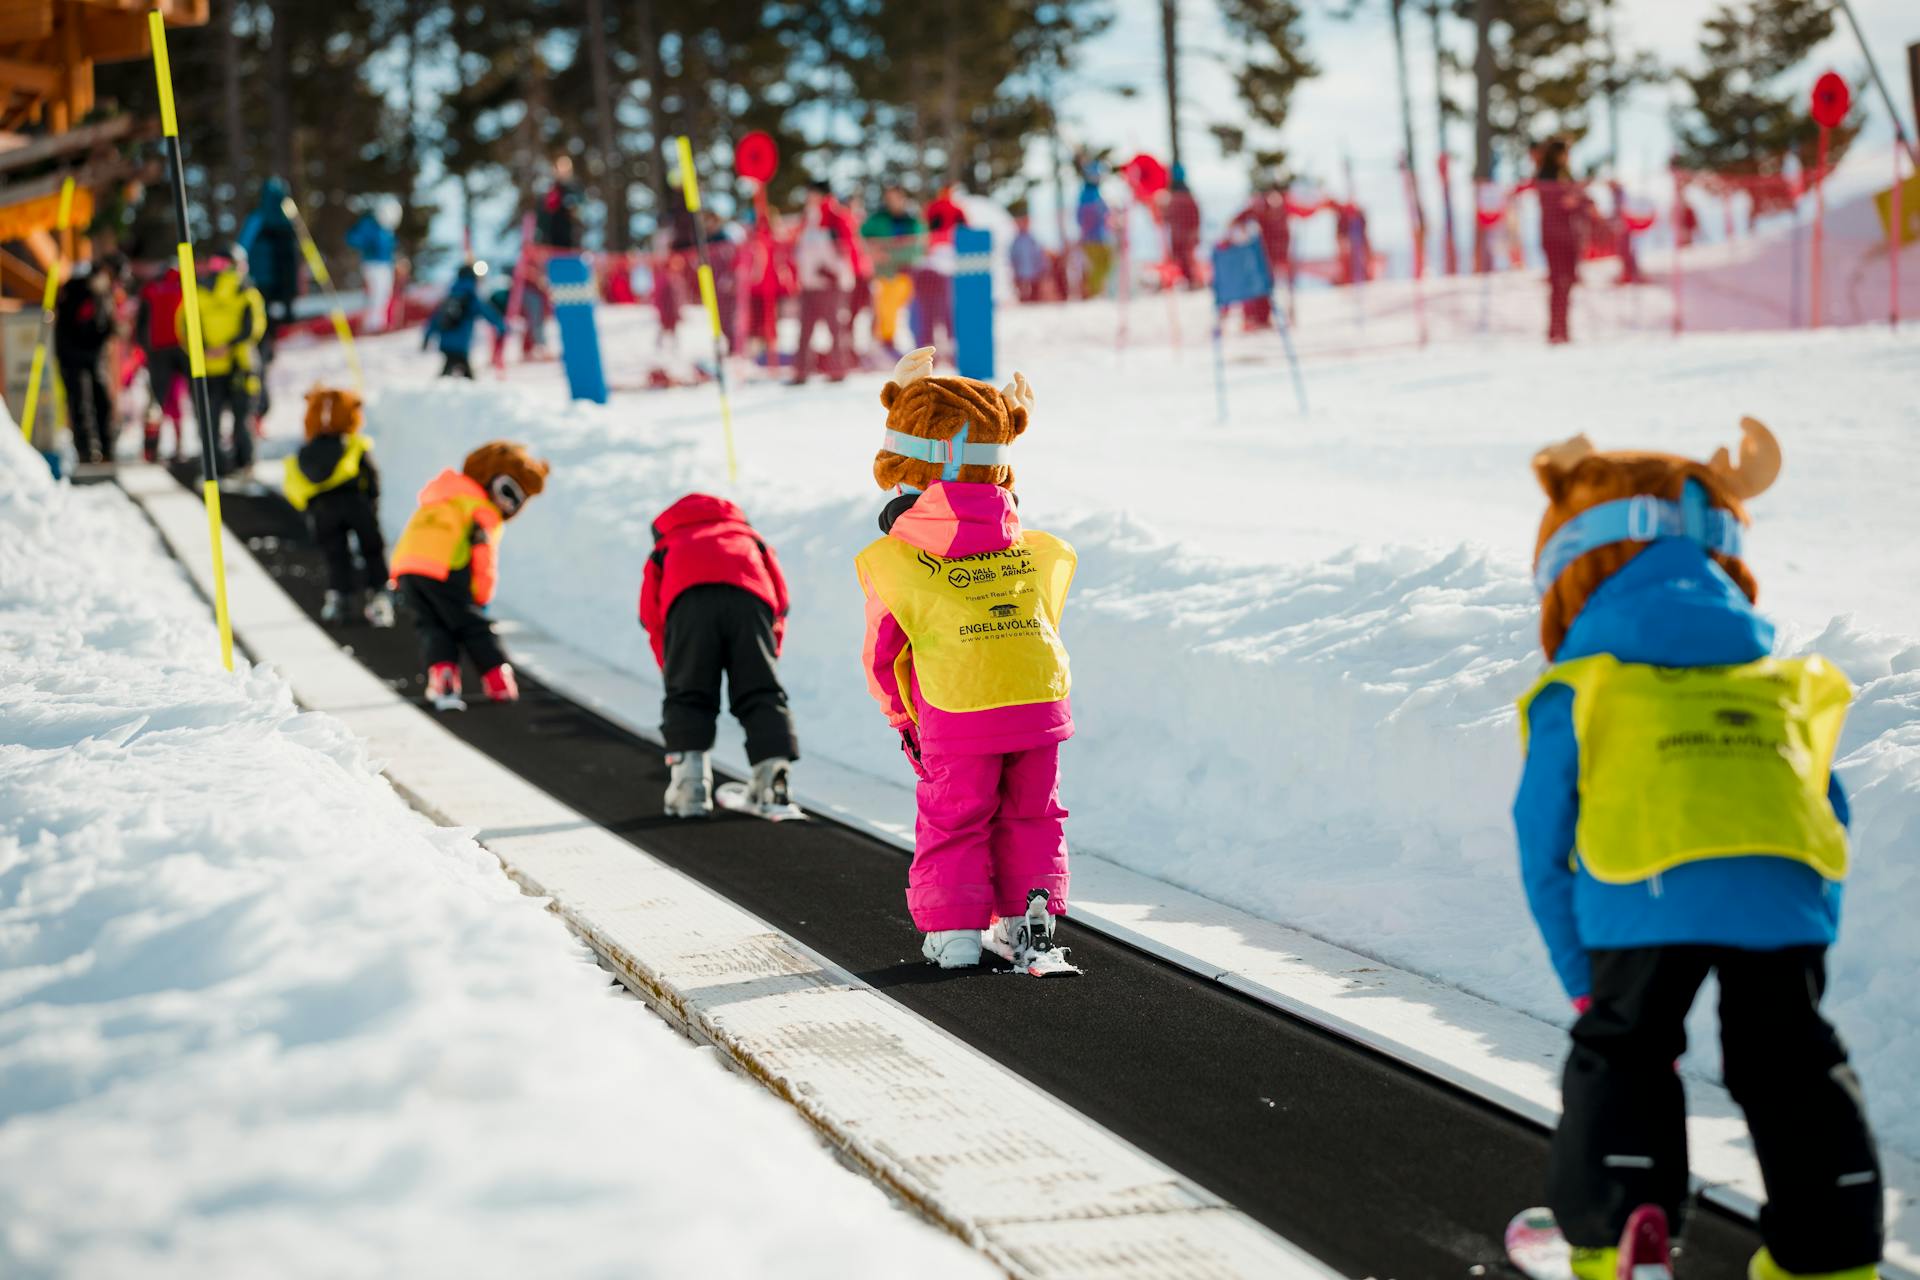 Young children travelling in magic carpet while learning how to ski